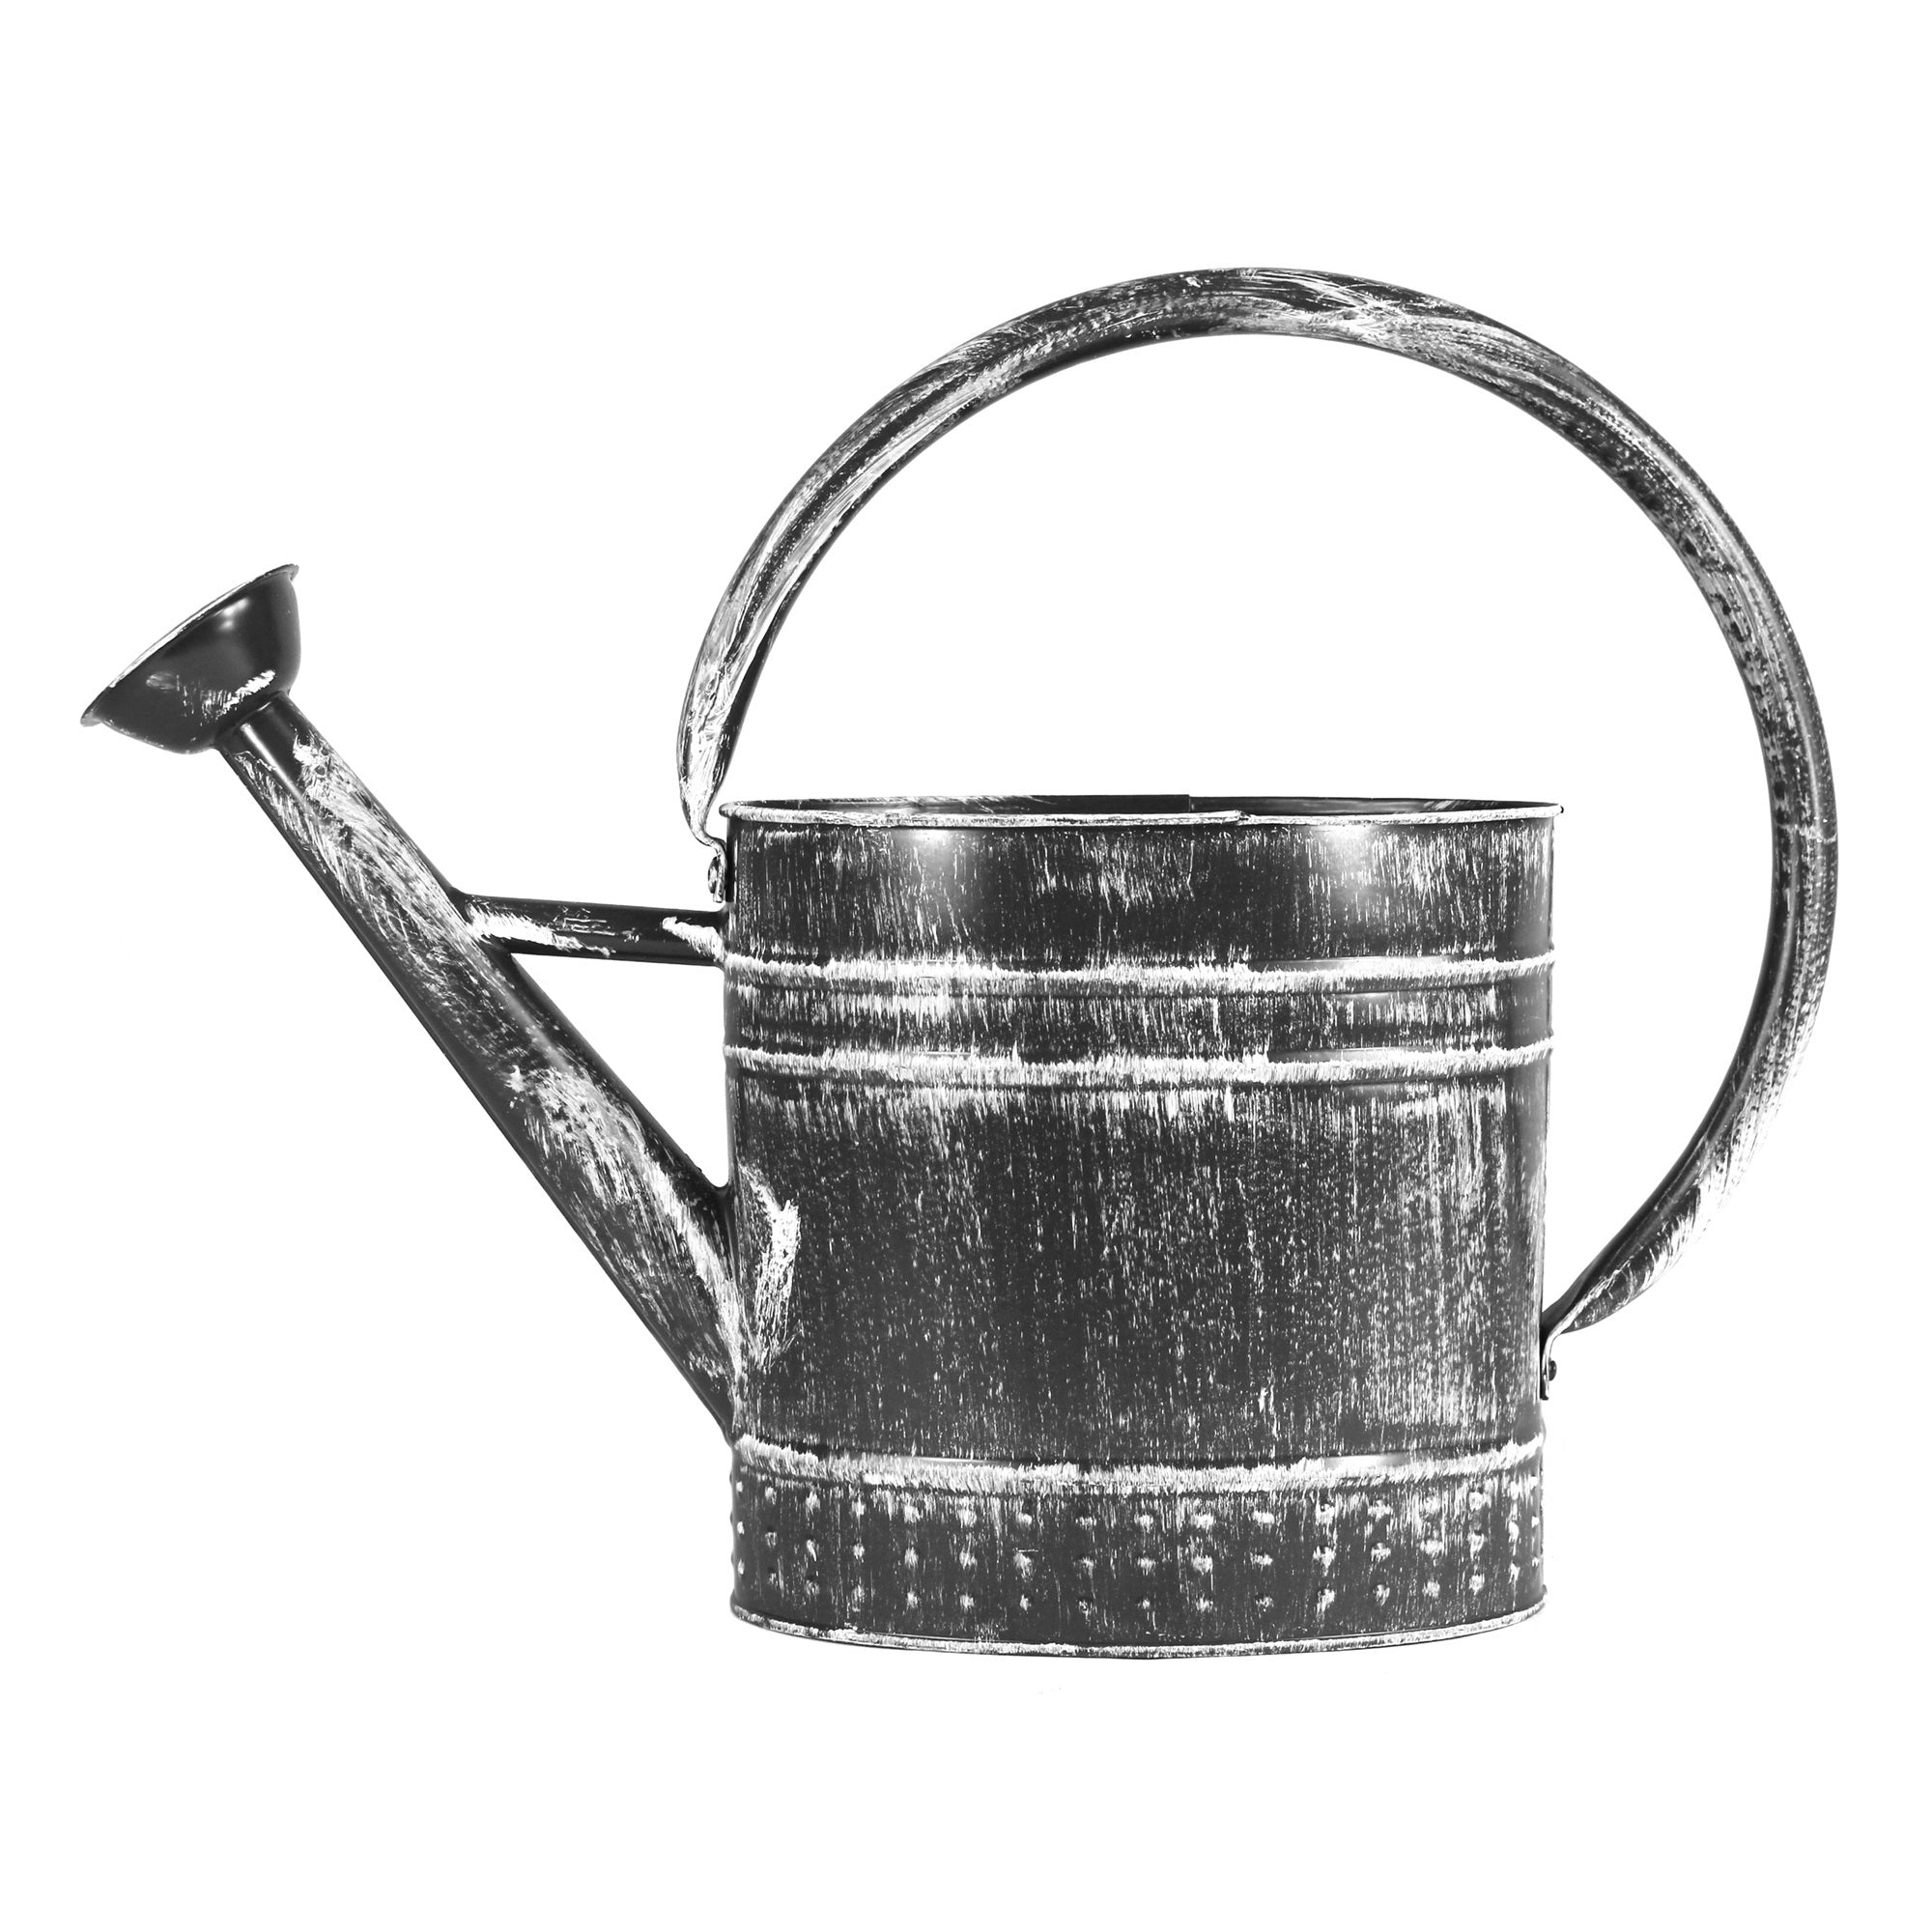 Gardener Select Metal Oval Watering Can, Antique Black, 3.5L (0.92 gallons)